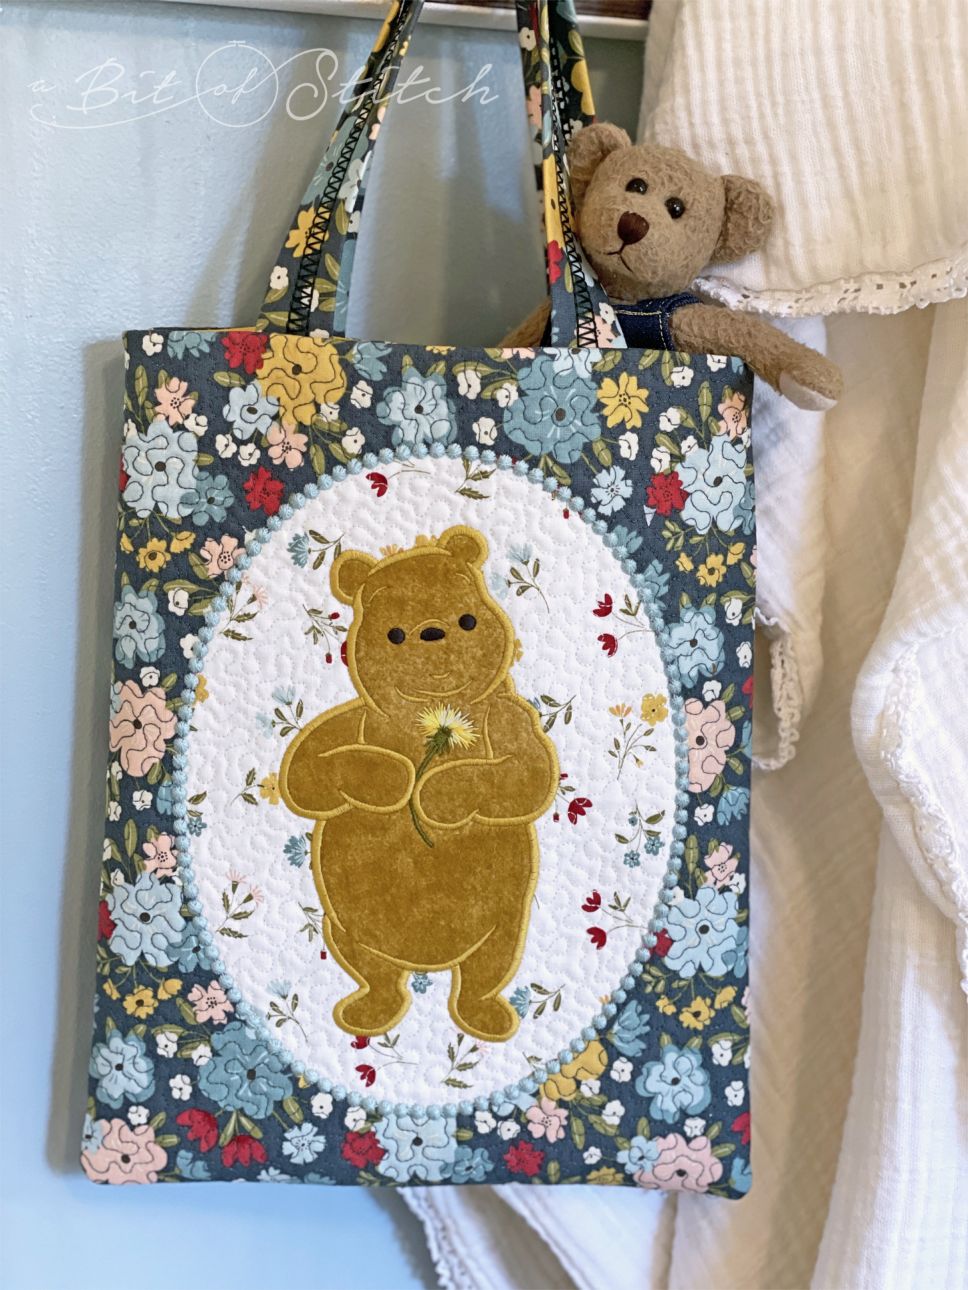 Framed Winnie the Pooh applique on tote bag - machine embroidery designs from A Bit of Stitch